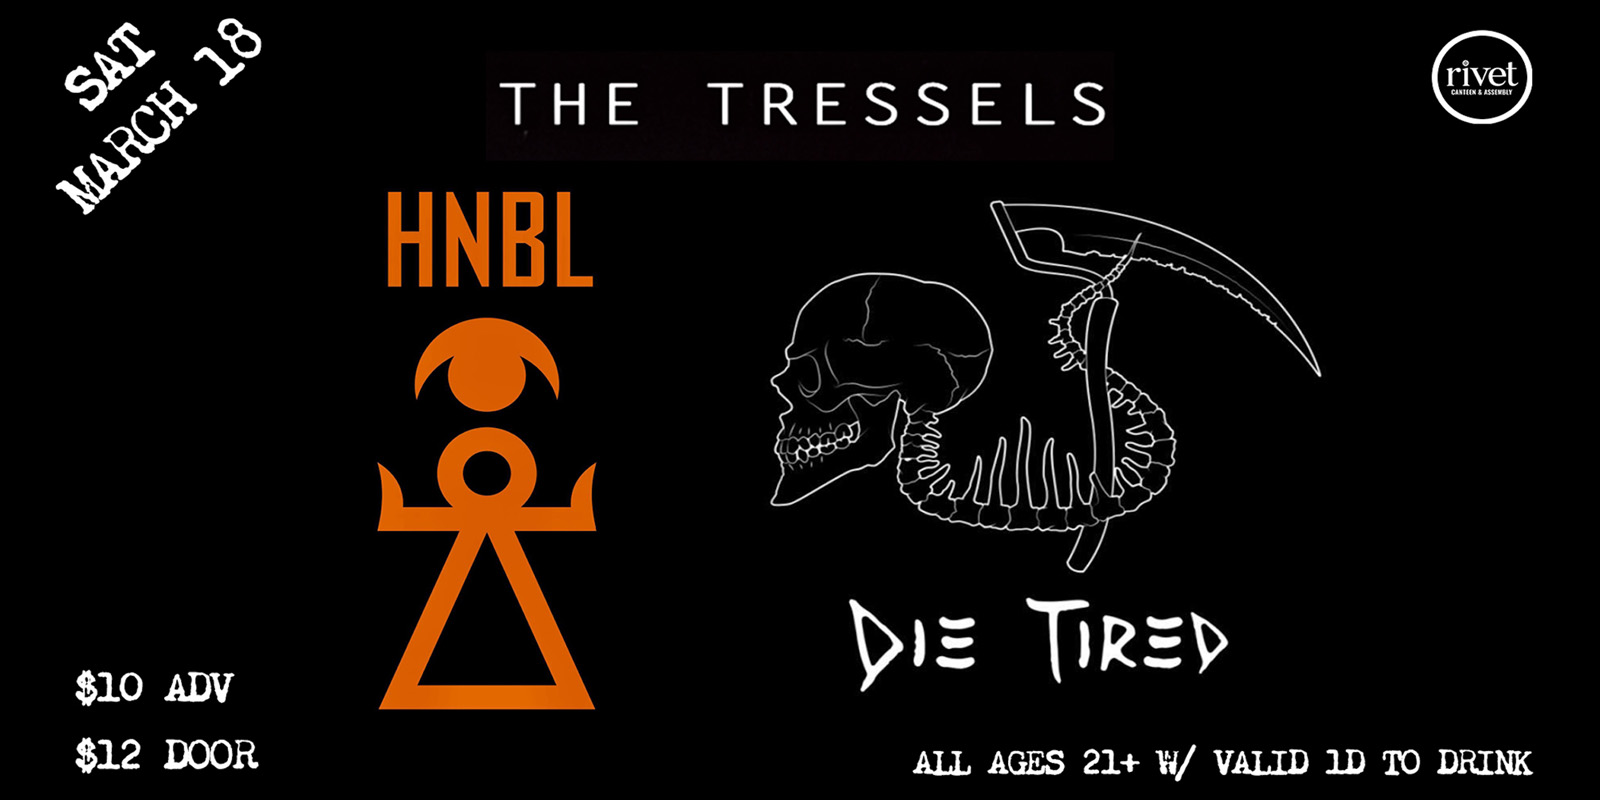 A triple banger of diverse awesomeness. Three of the best original bands in the region share the stage for one awesome night at Rivet: Canteen & Assembly on Saturday, March 18th, 2023. Bands: Die Tired, Hannibal, and The Tressels!